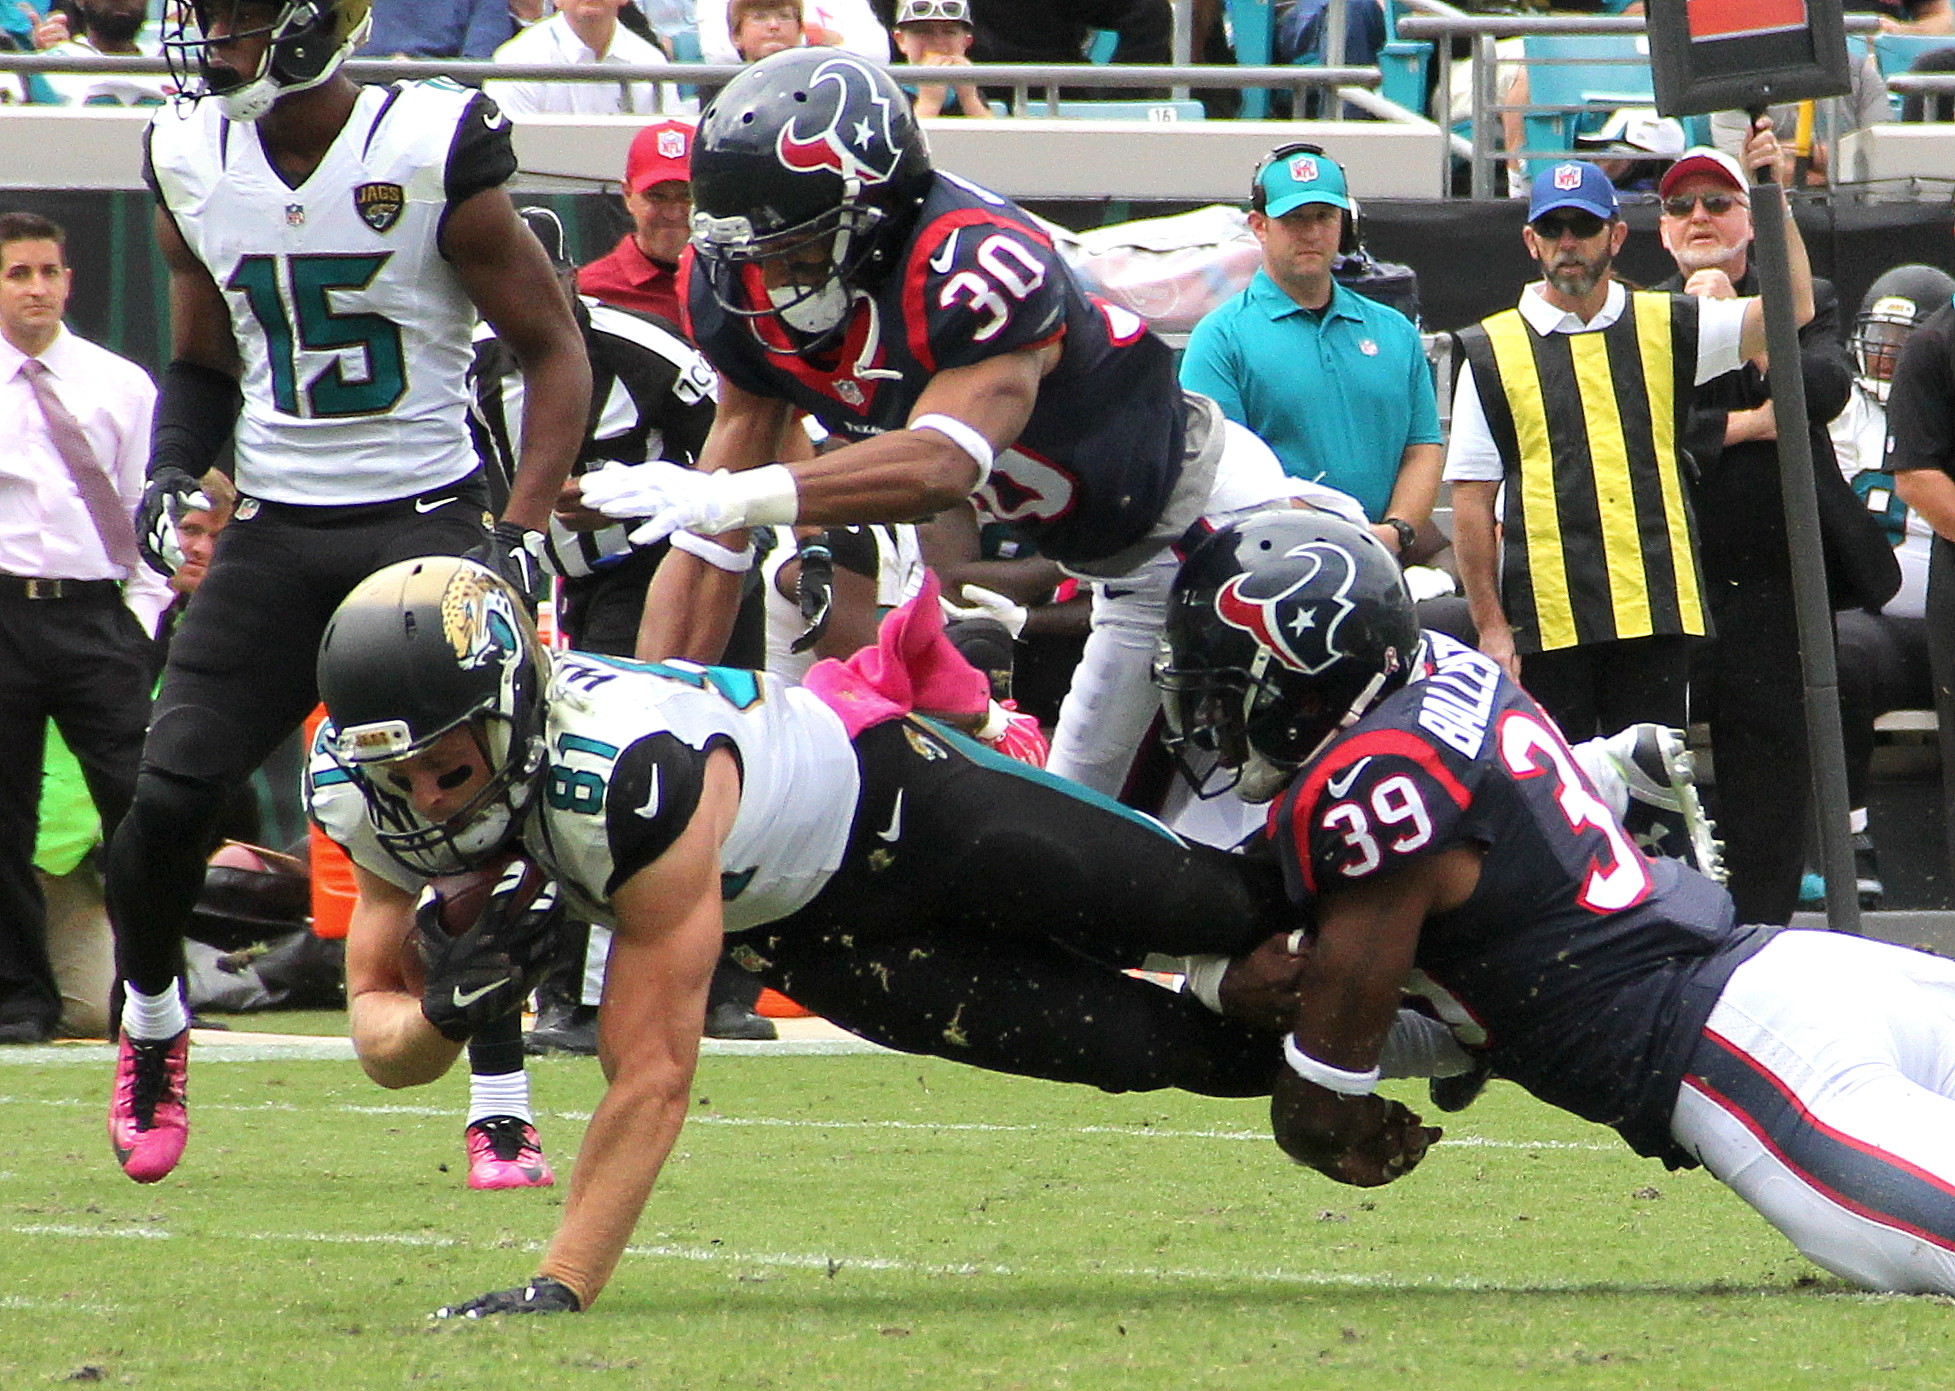 Jacksonville wide receiver Bryan Walters caught eight passes for 87 yards in the 31-20 loss to Houston Sunday.